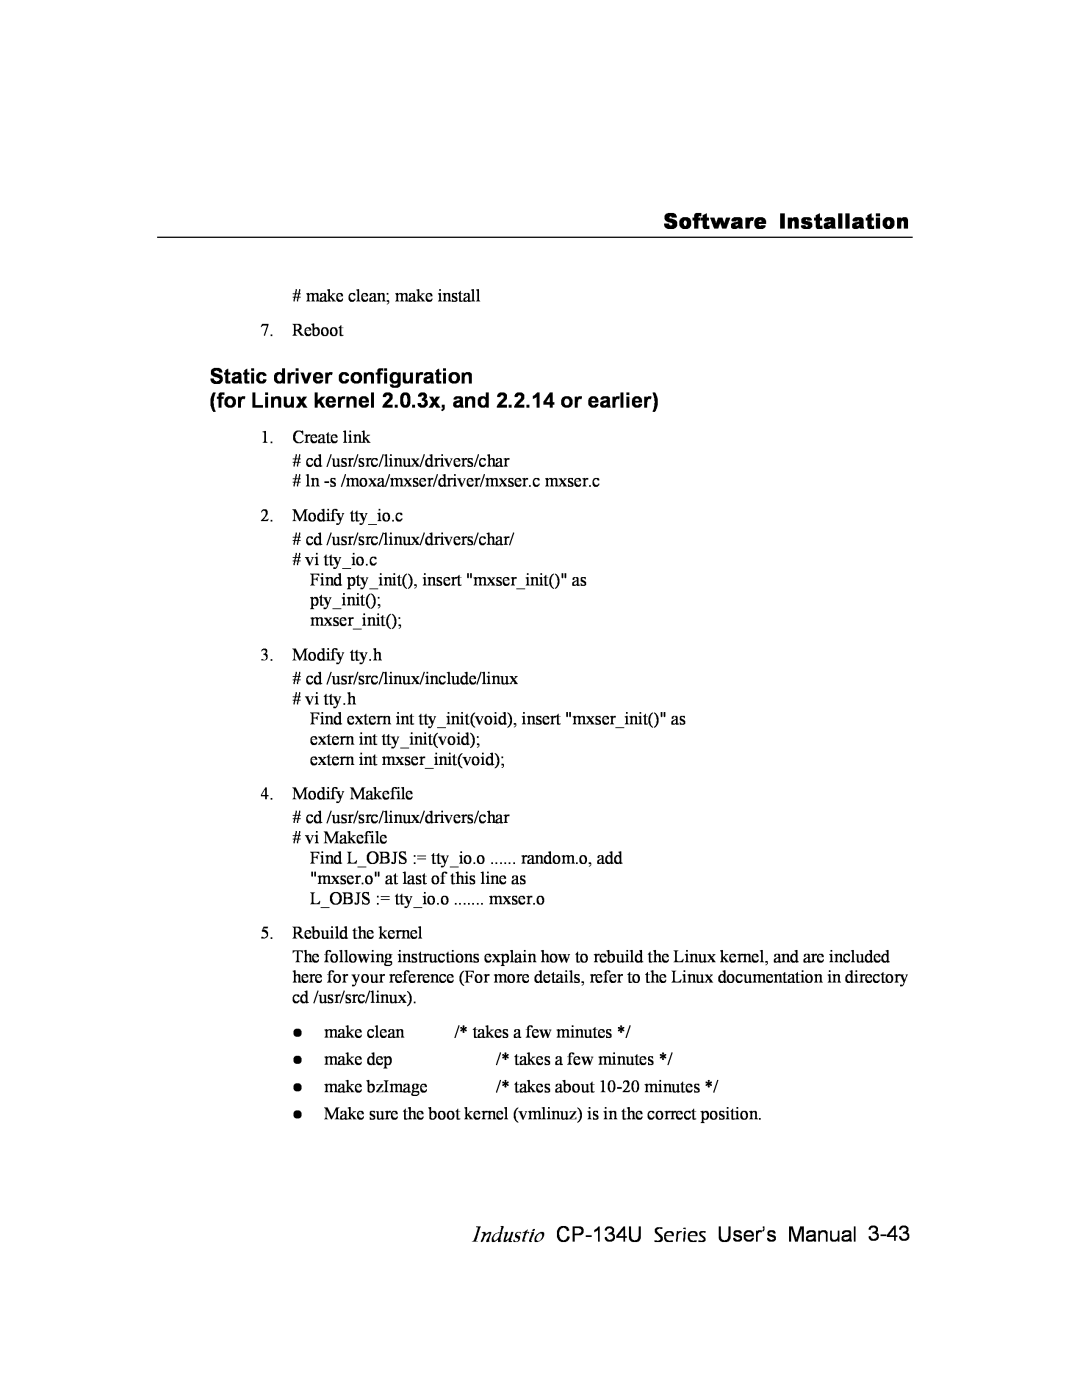 Moxa Technologies CP-134U user manual for Linux kernel 2.0.3x, and 2.2.14 or earlier, Software Installation 